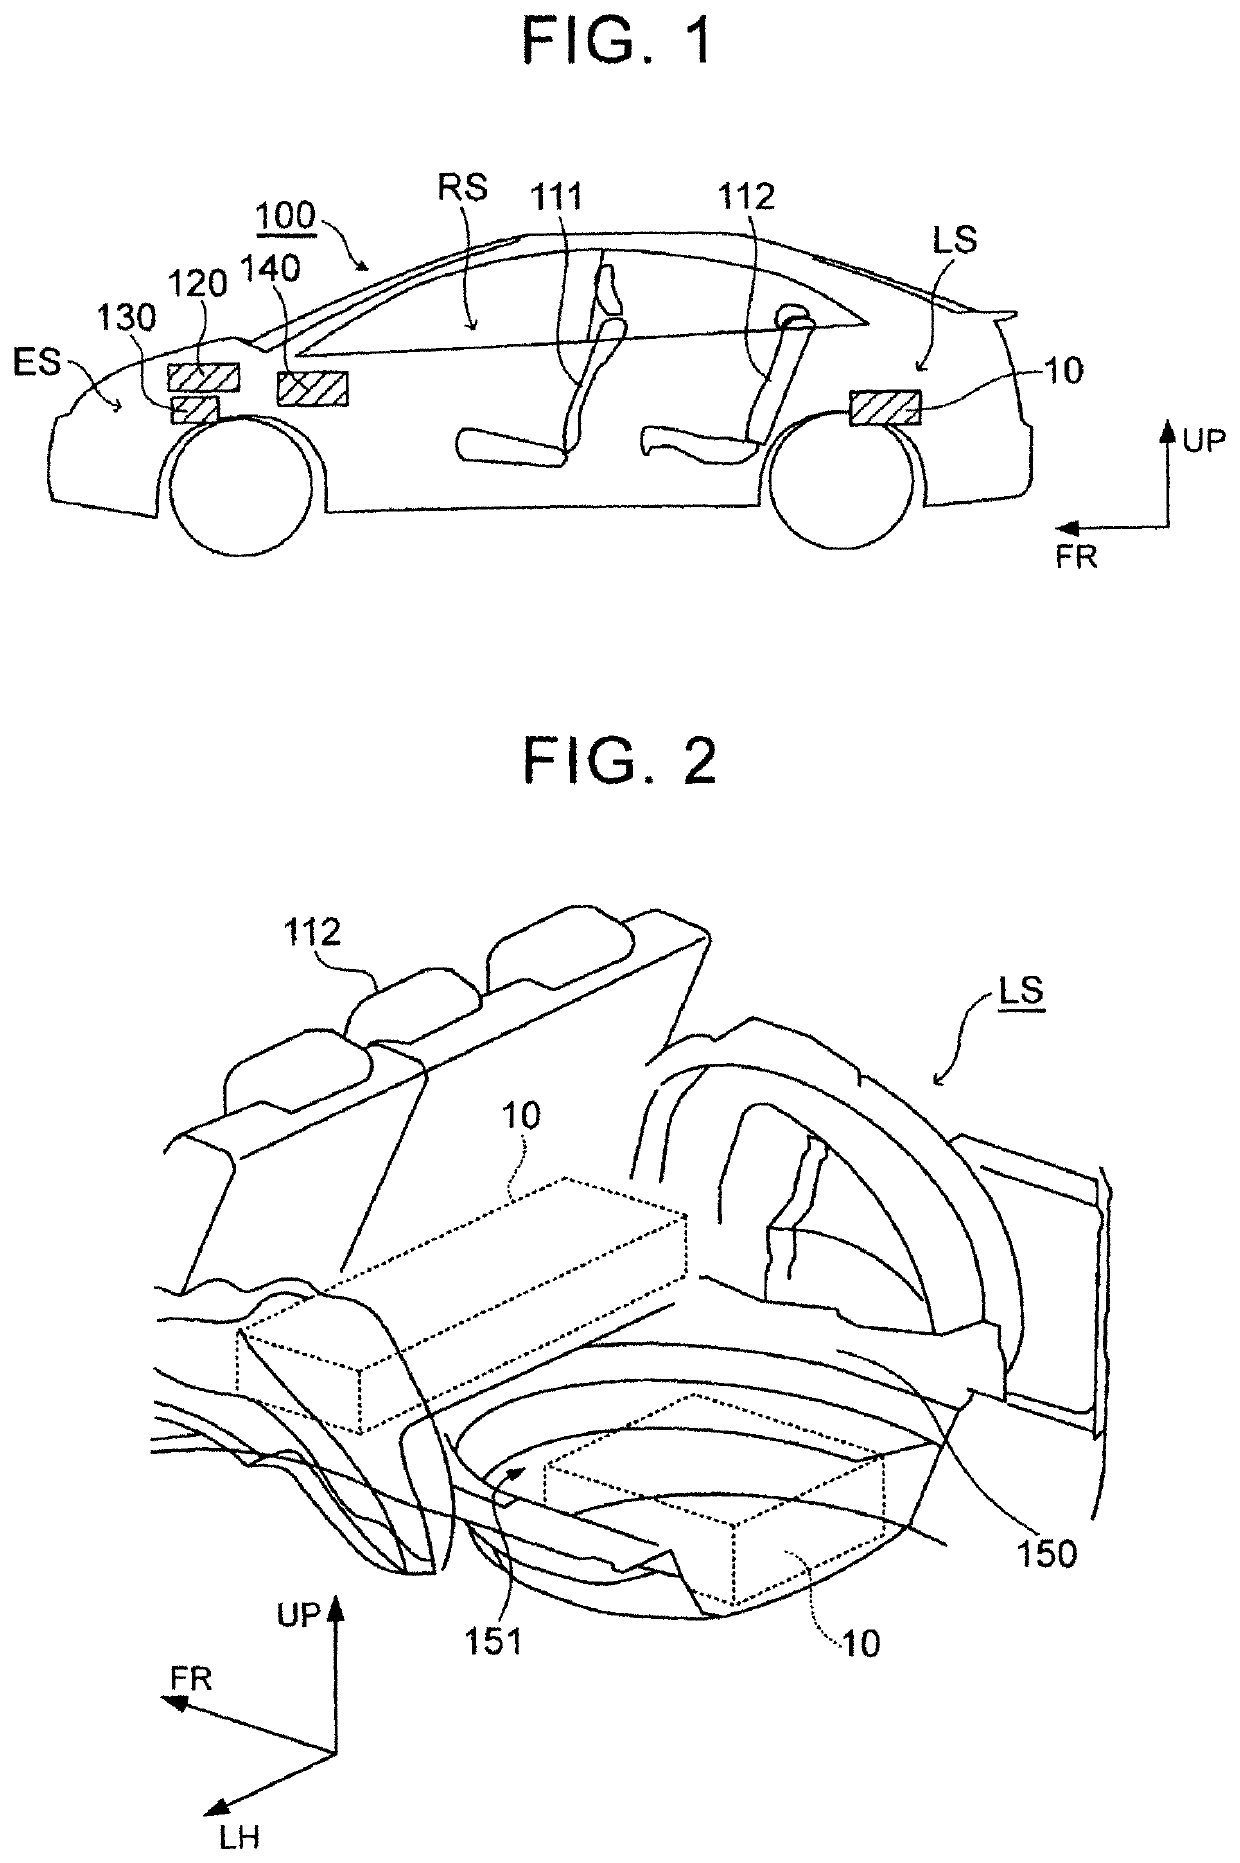 Vehicle comprising an electrical storage device cooled by a fan